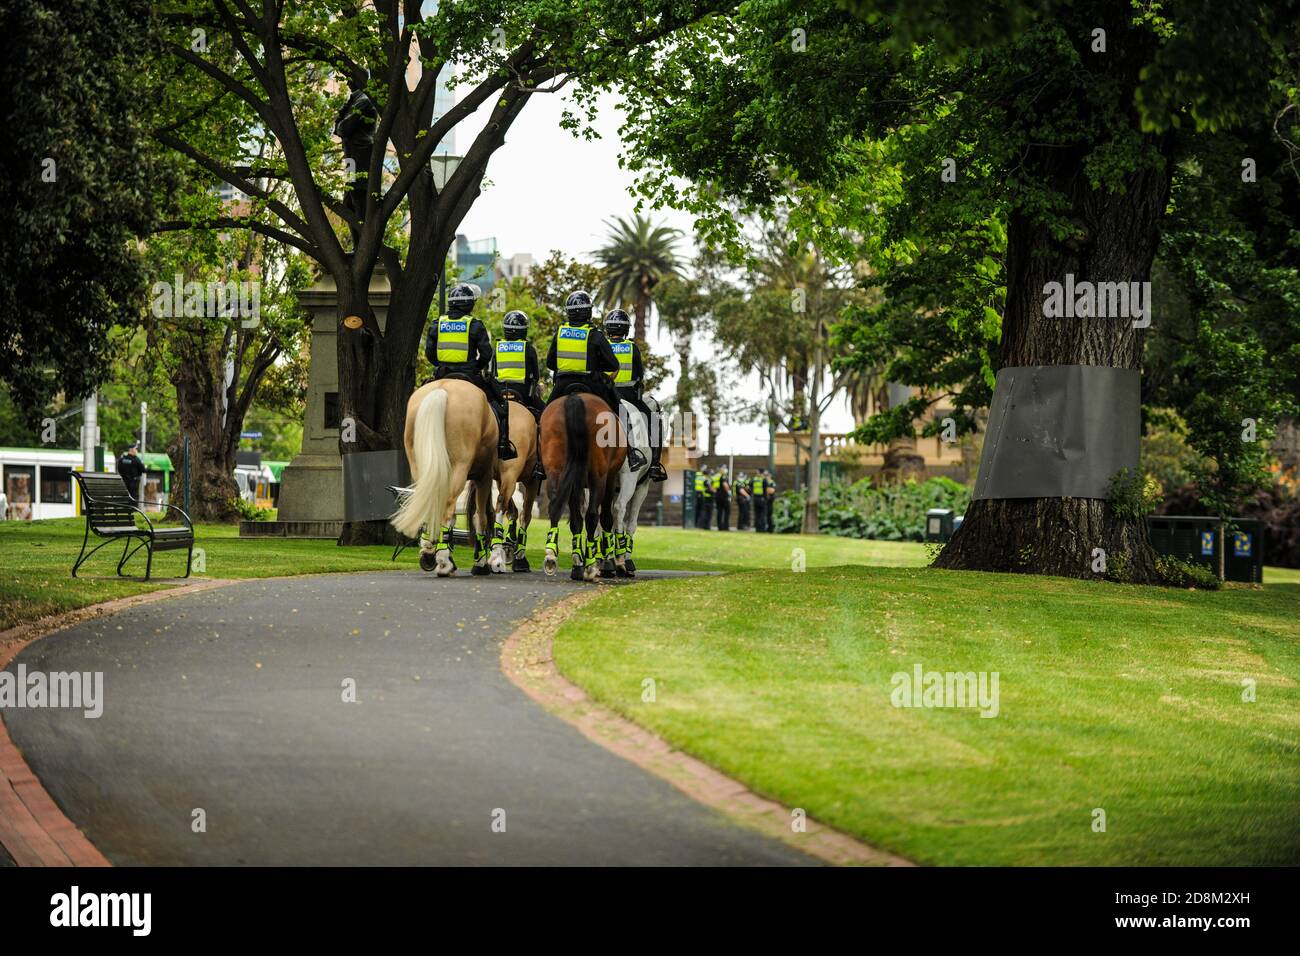 Melbourne, Australia 31 Oct 2020, Mounted Police Officers ride along a path in Treasury Gardens in preparation for a major police action to control an anti-government protest planned for the park. Credit: Michael Currie/Alamy Live News Stock Photo